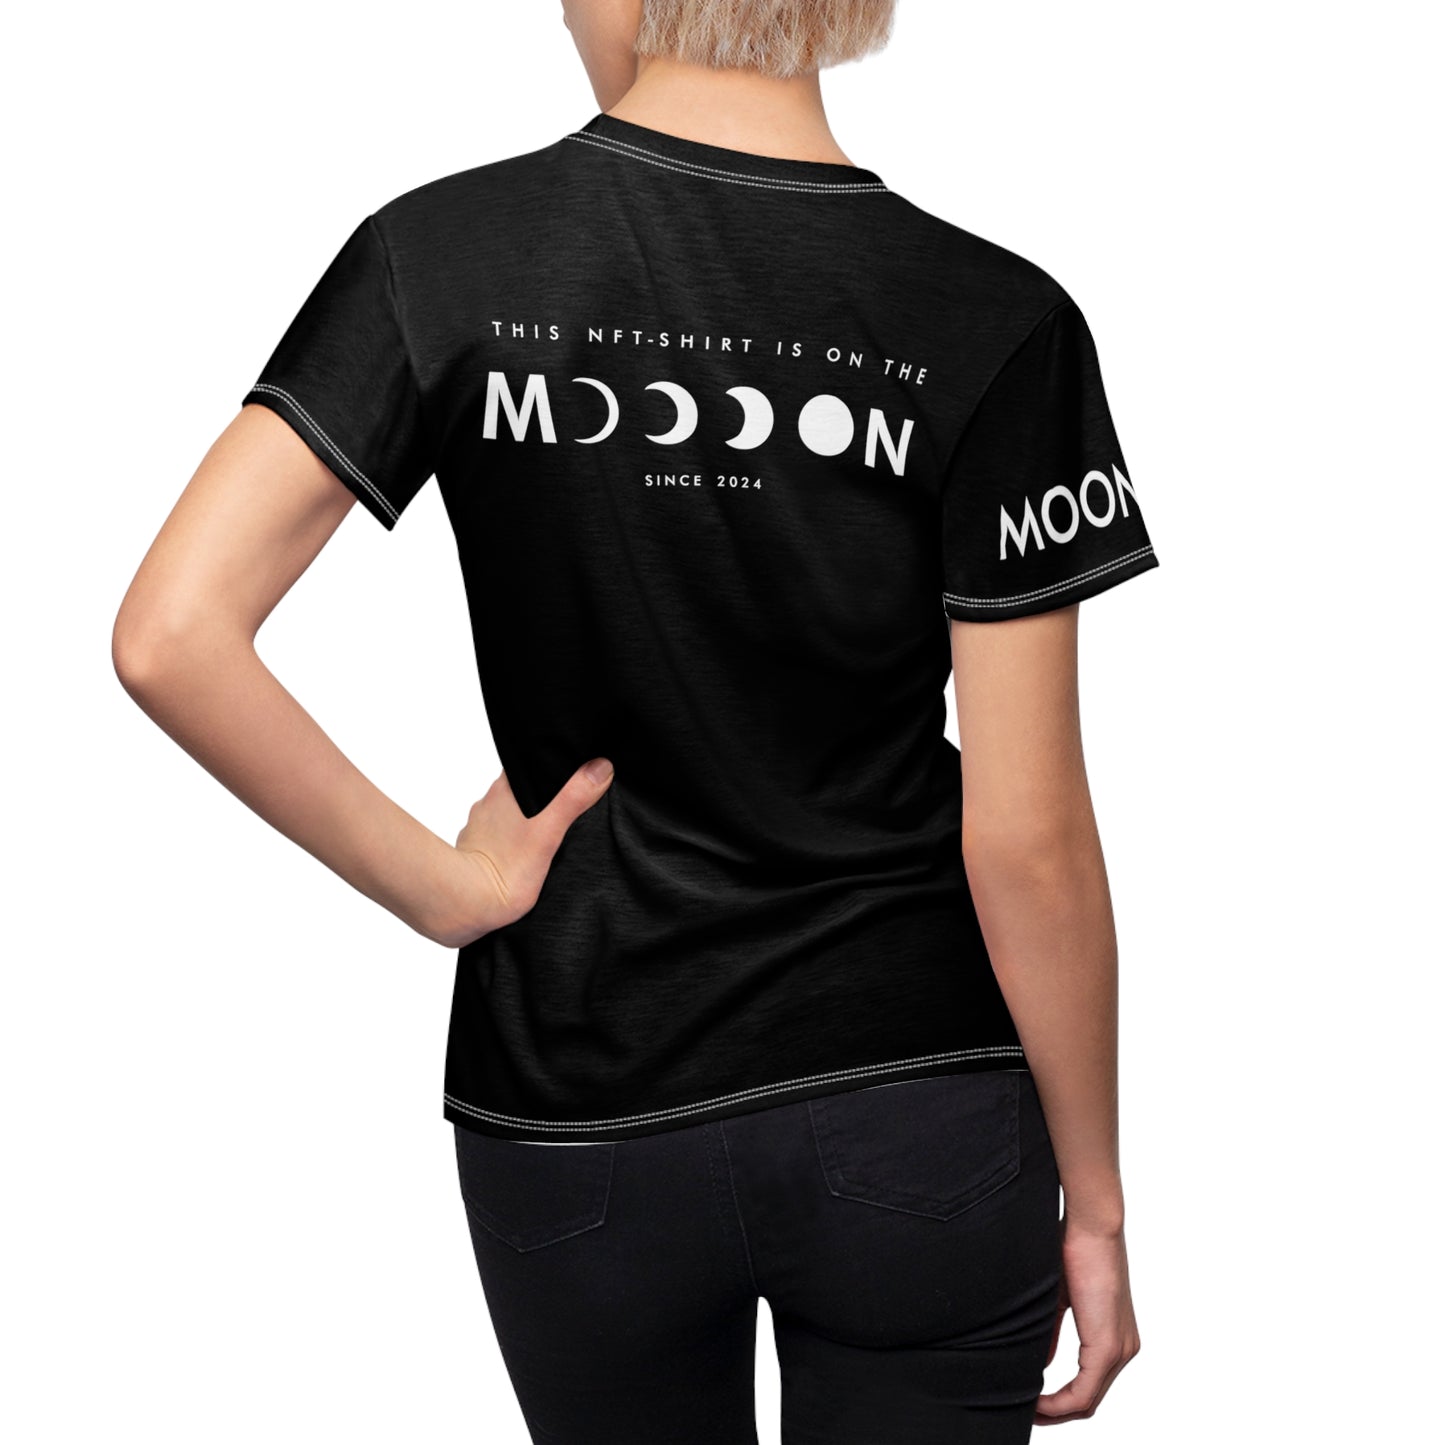 This NFT-Shirt is on the Moon BLACK Short Sleeve Sublimation Dye